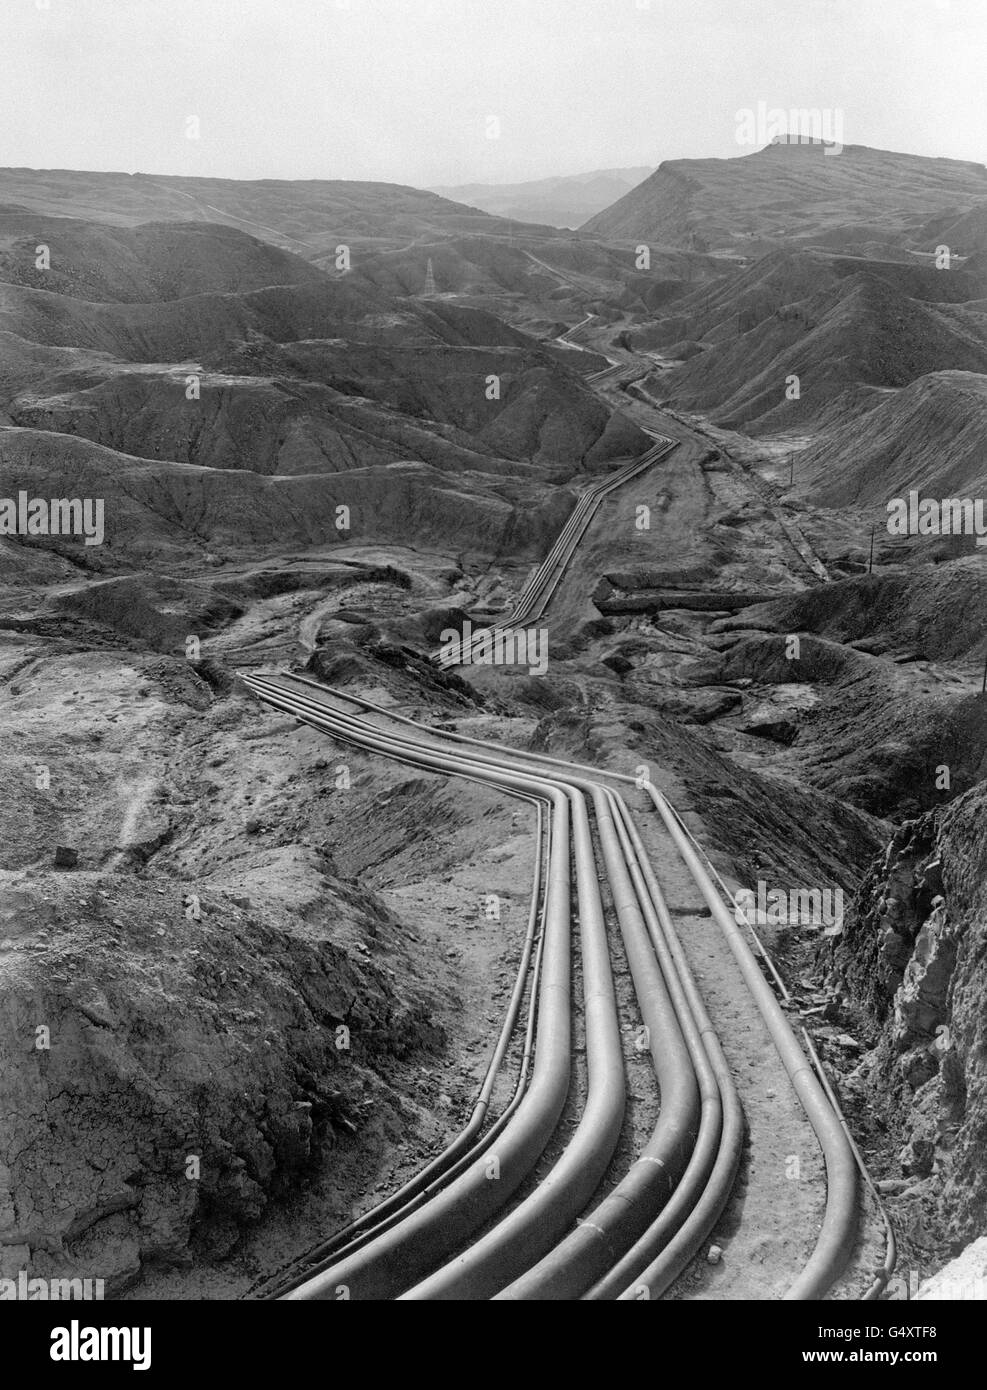 Pipelines belonging to the Anglo-Iranian Abadan oil refinery weave through the mountainous oilfield area of Persia, Iran Stock Photo